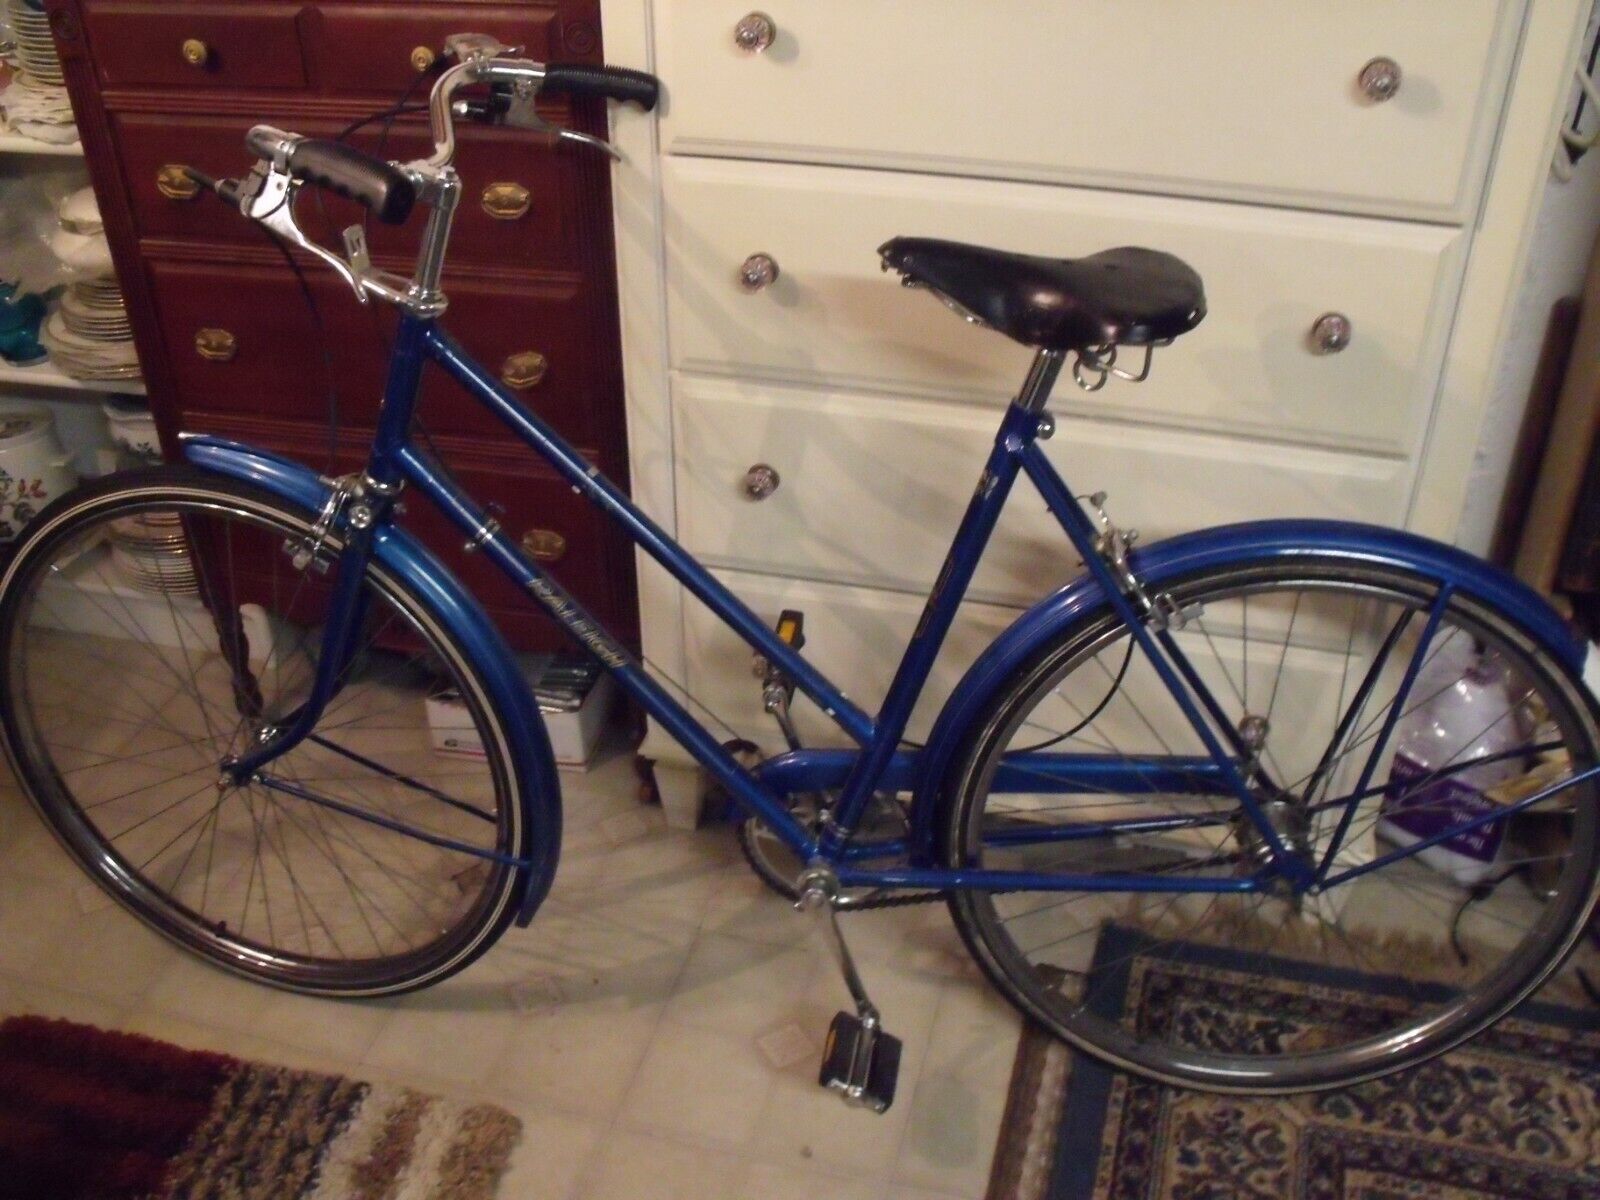  ORIGINAL CLASSIC VINTAGE 1970 WOMEN'S RALEIGH BLUE SPORTS BICYCLE Raleigh Sports